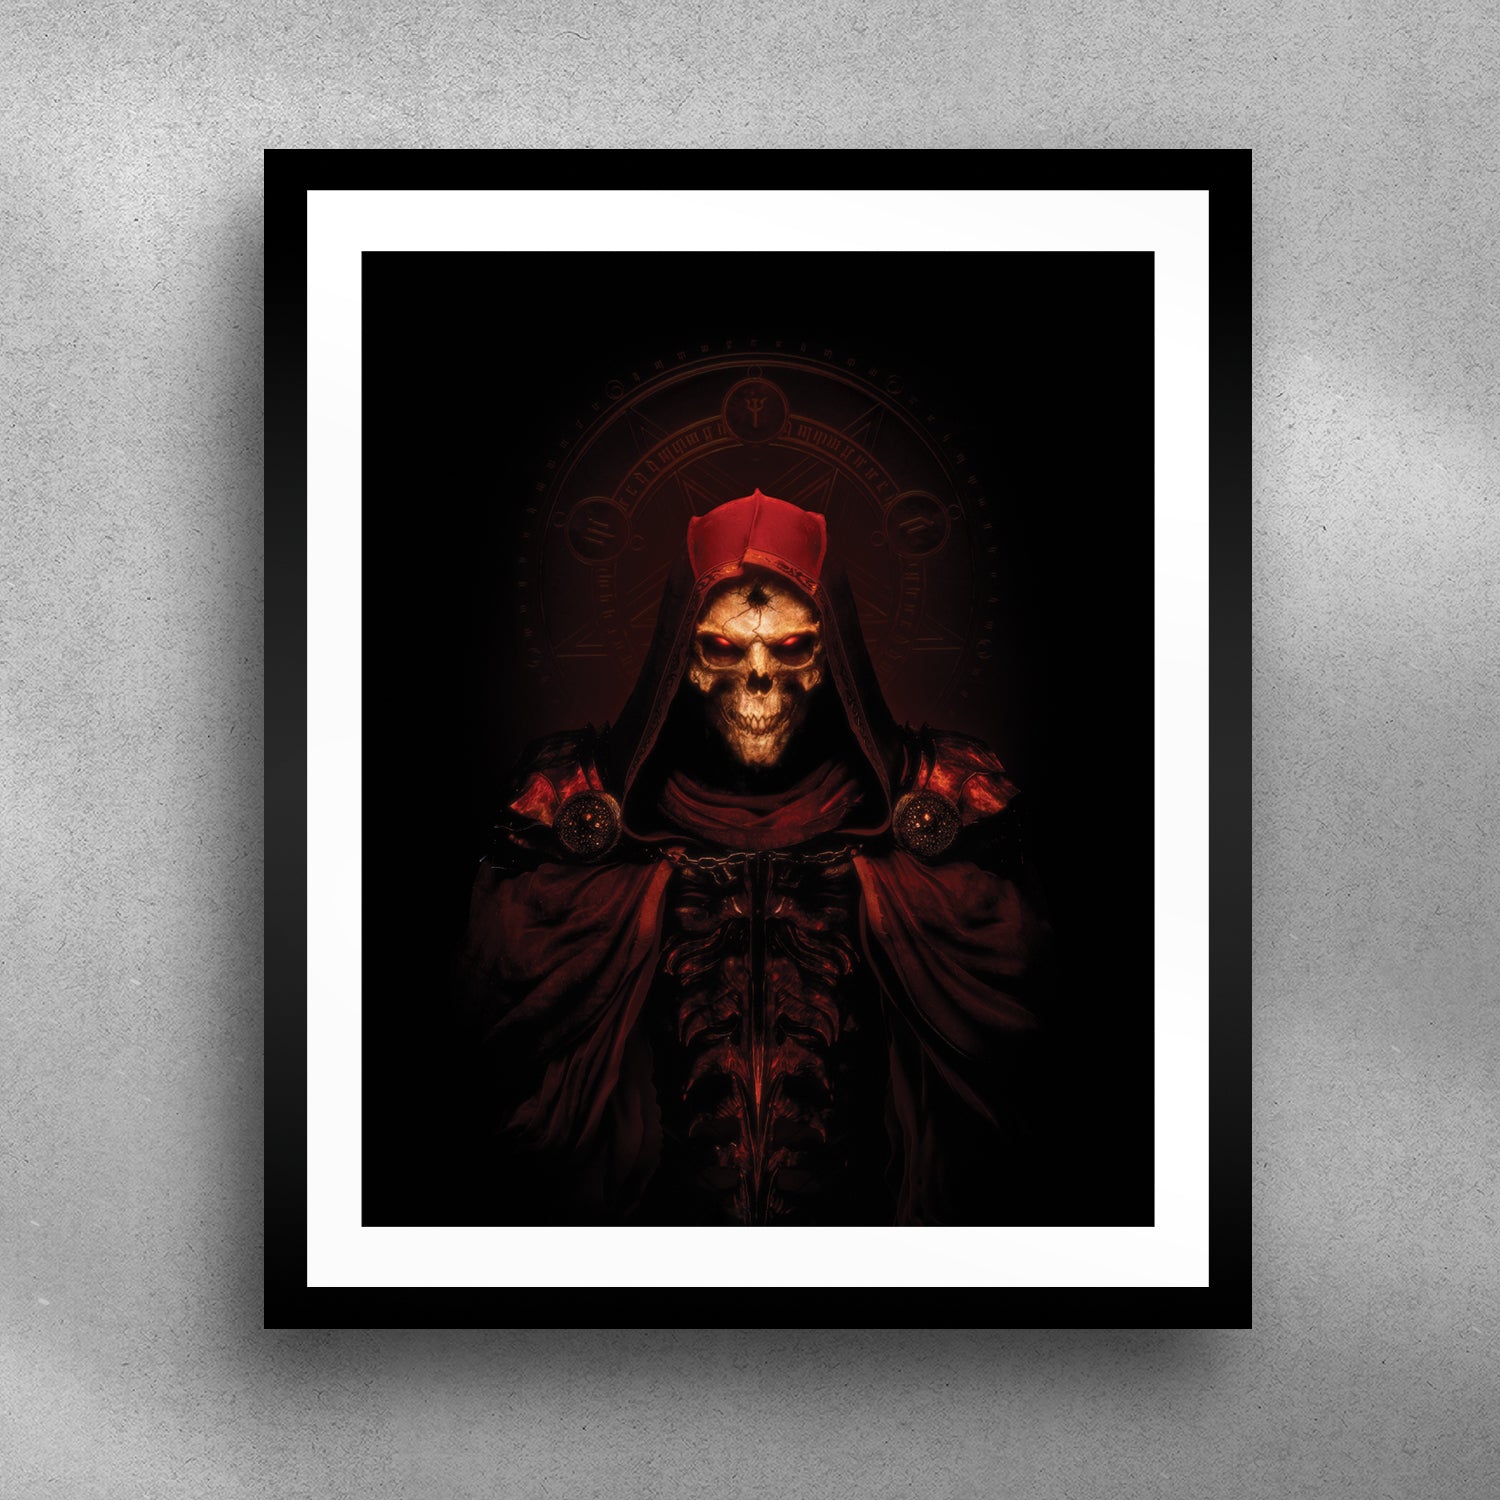 Diablo II: Resurrected 16 x 20in Framed Art Print - Front View with Framed Art Print on Wall